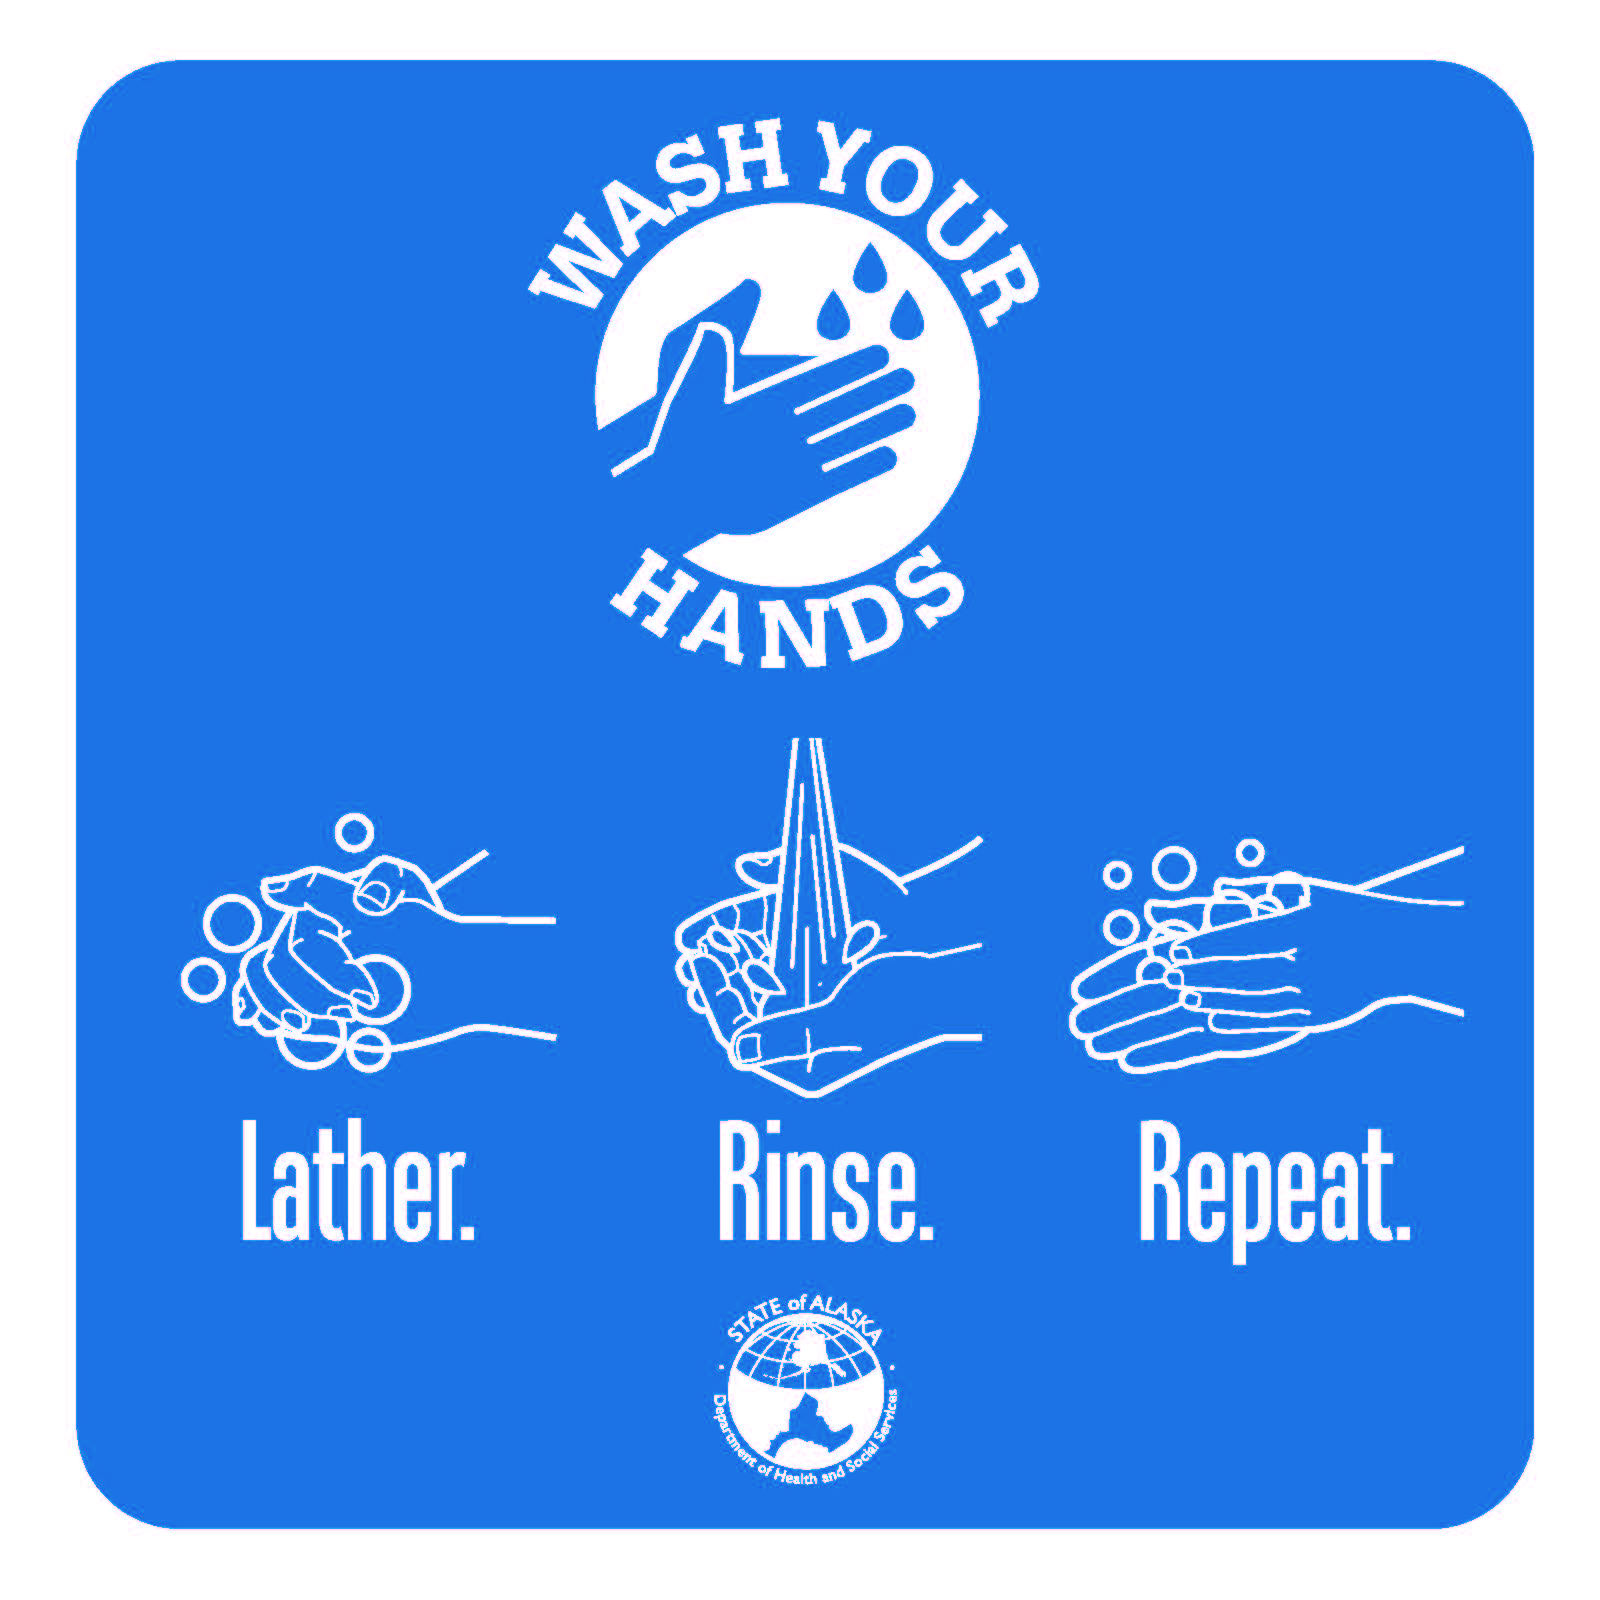 Wash your hands: Lather, rinse, repeat.